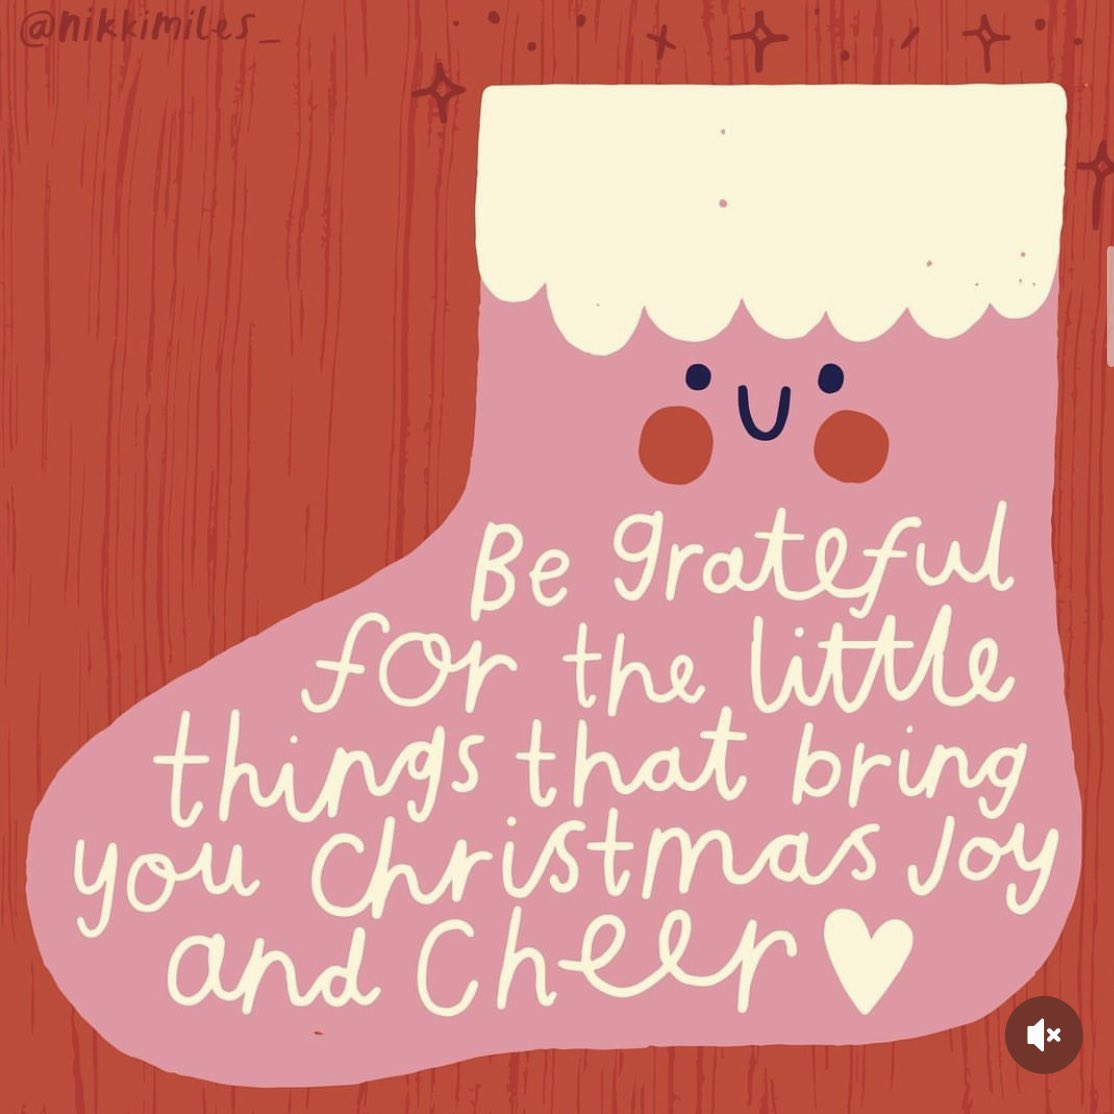 Be grateful for the little things that bring joy and cheer, however small Image: instagram.com/nikkimiles_